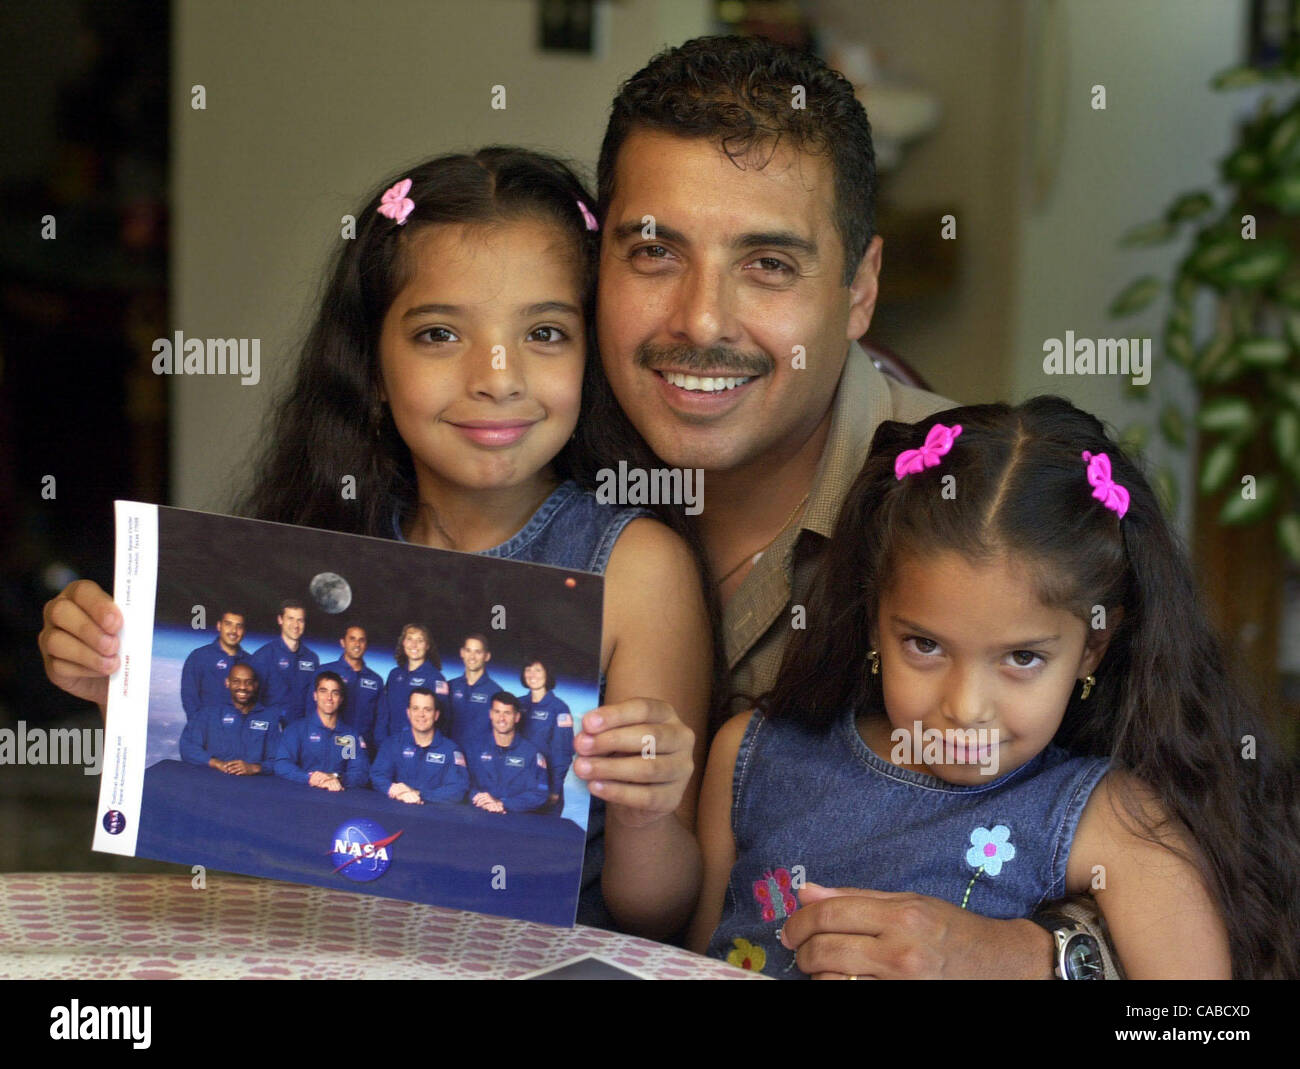 Astronaut Jose Hernandez 41 With Two Of His Children Karina 8 And CABCXD 